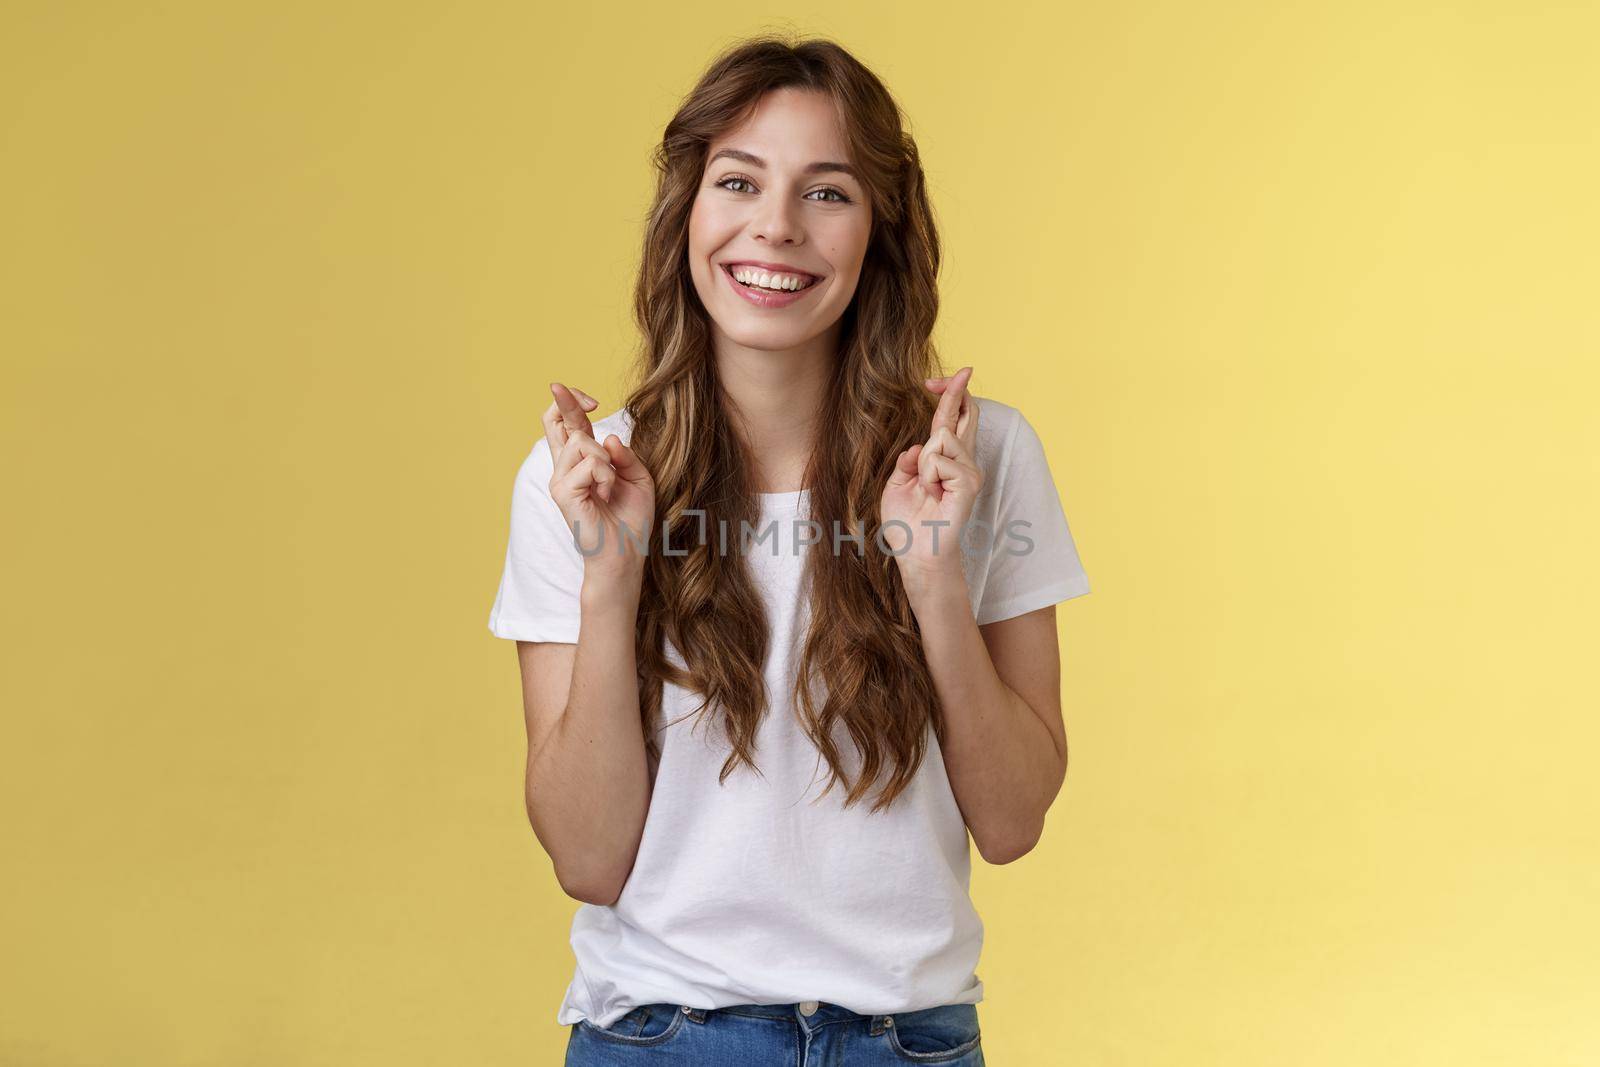 Girl faithfully believe dream come true hopefully awaiting positive results smiling broadly cross fingers good luck implore god good news stand excited optimistic yellow background by Benzoix